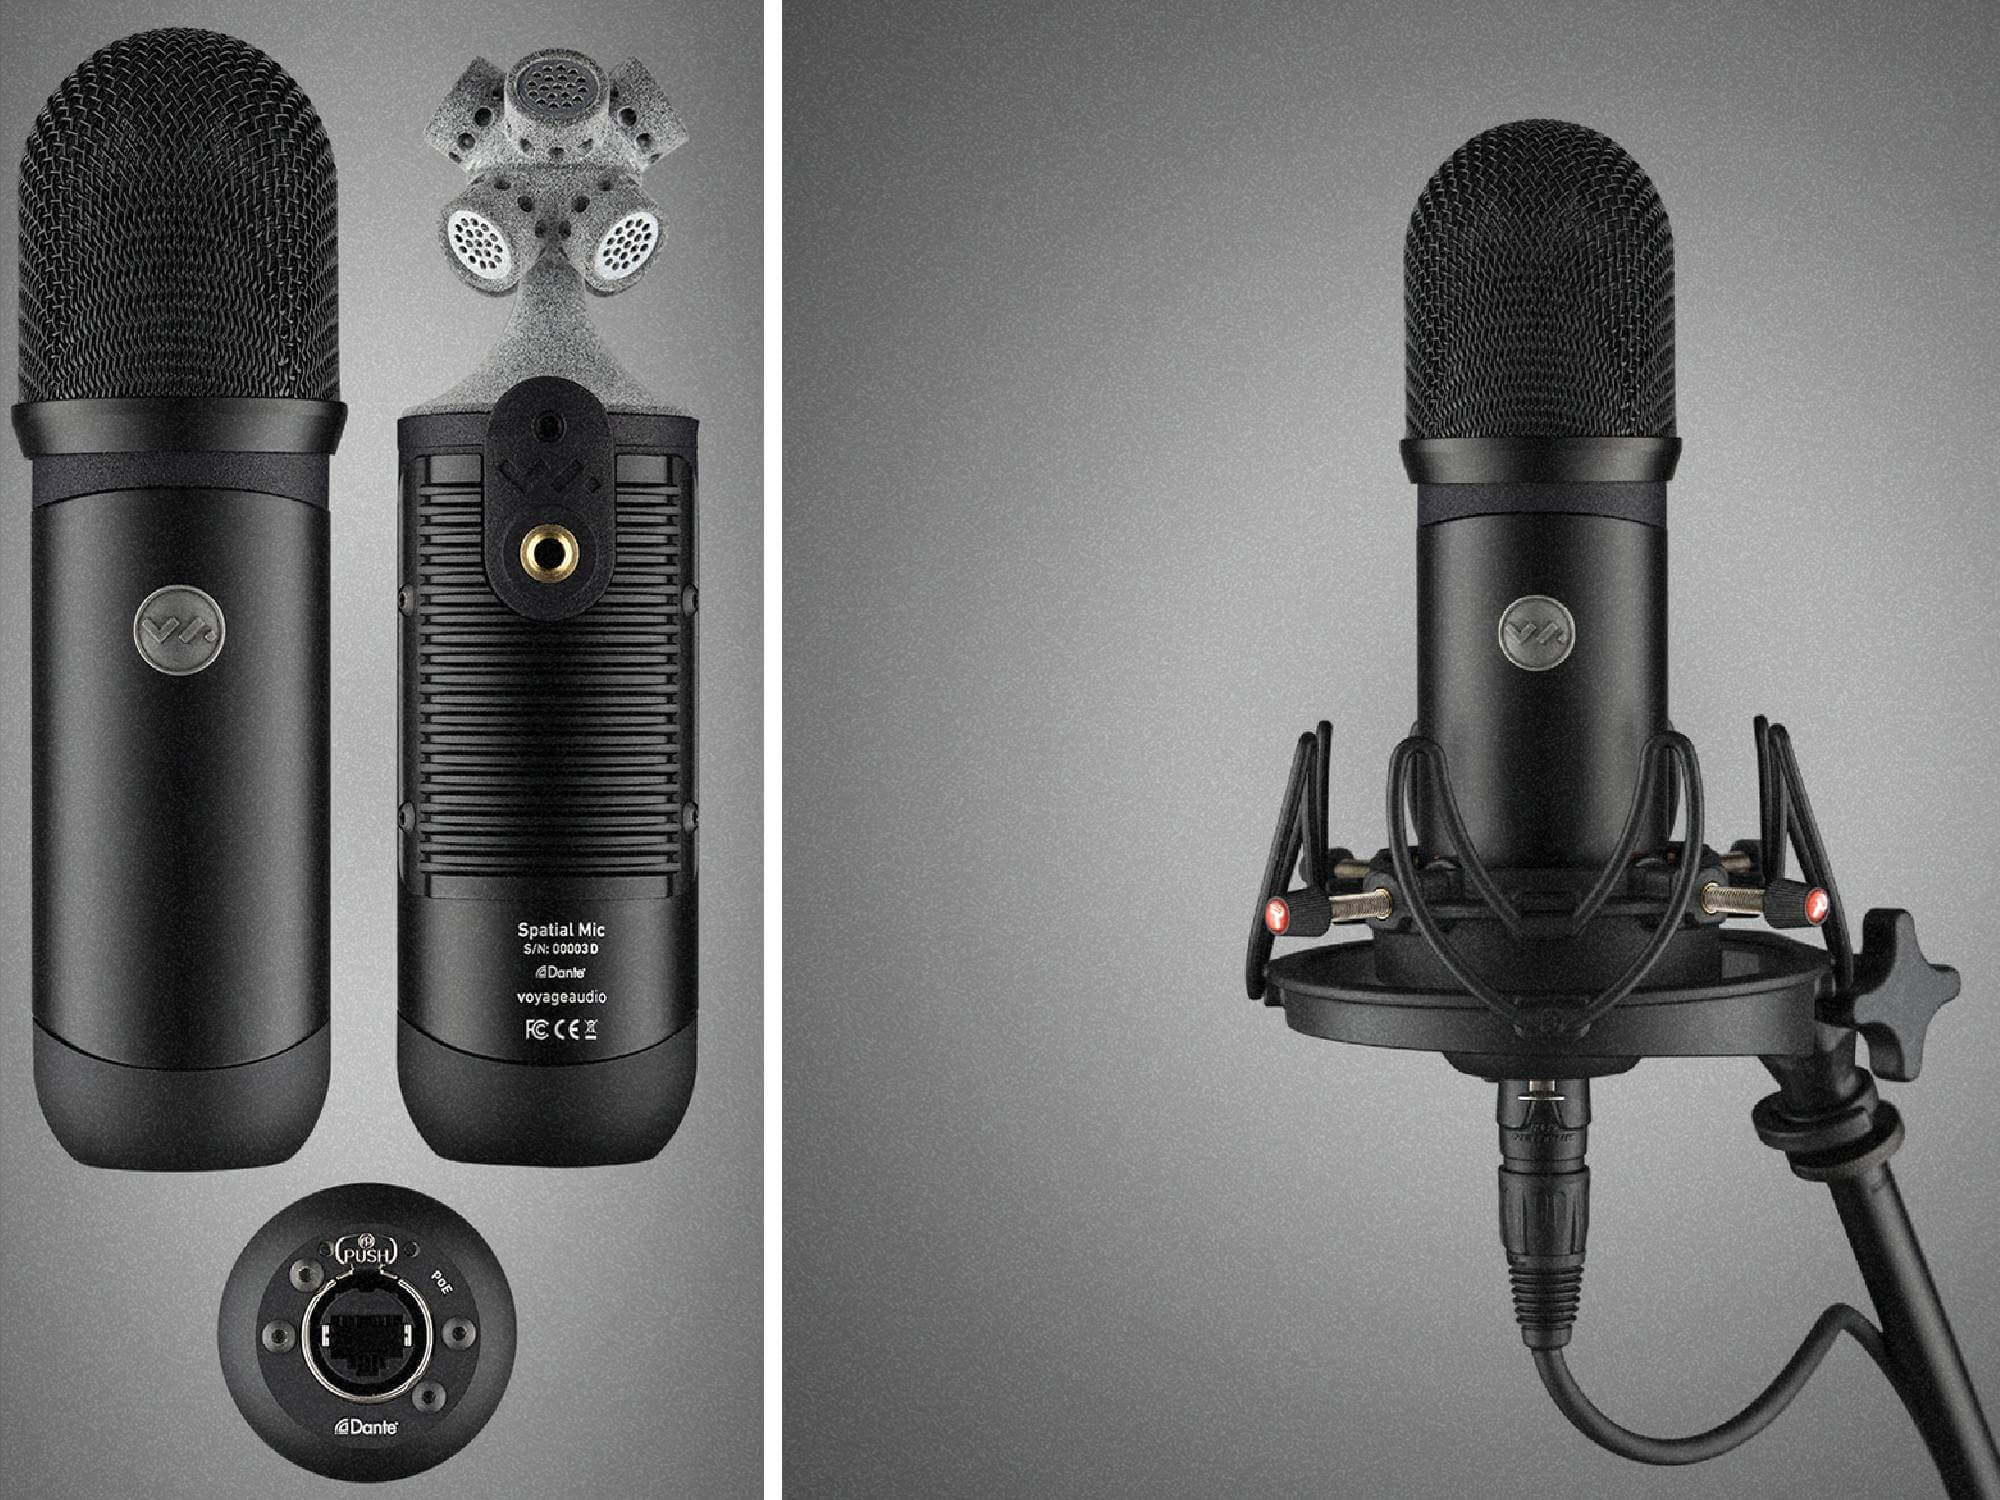 voyage audio spatial mic review